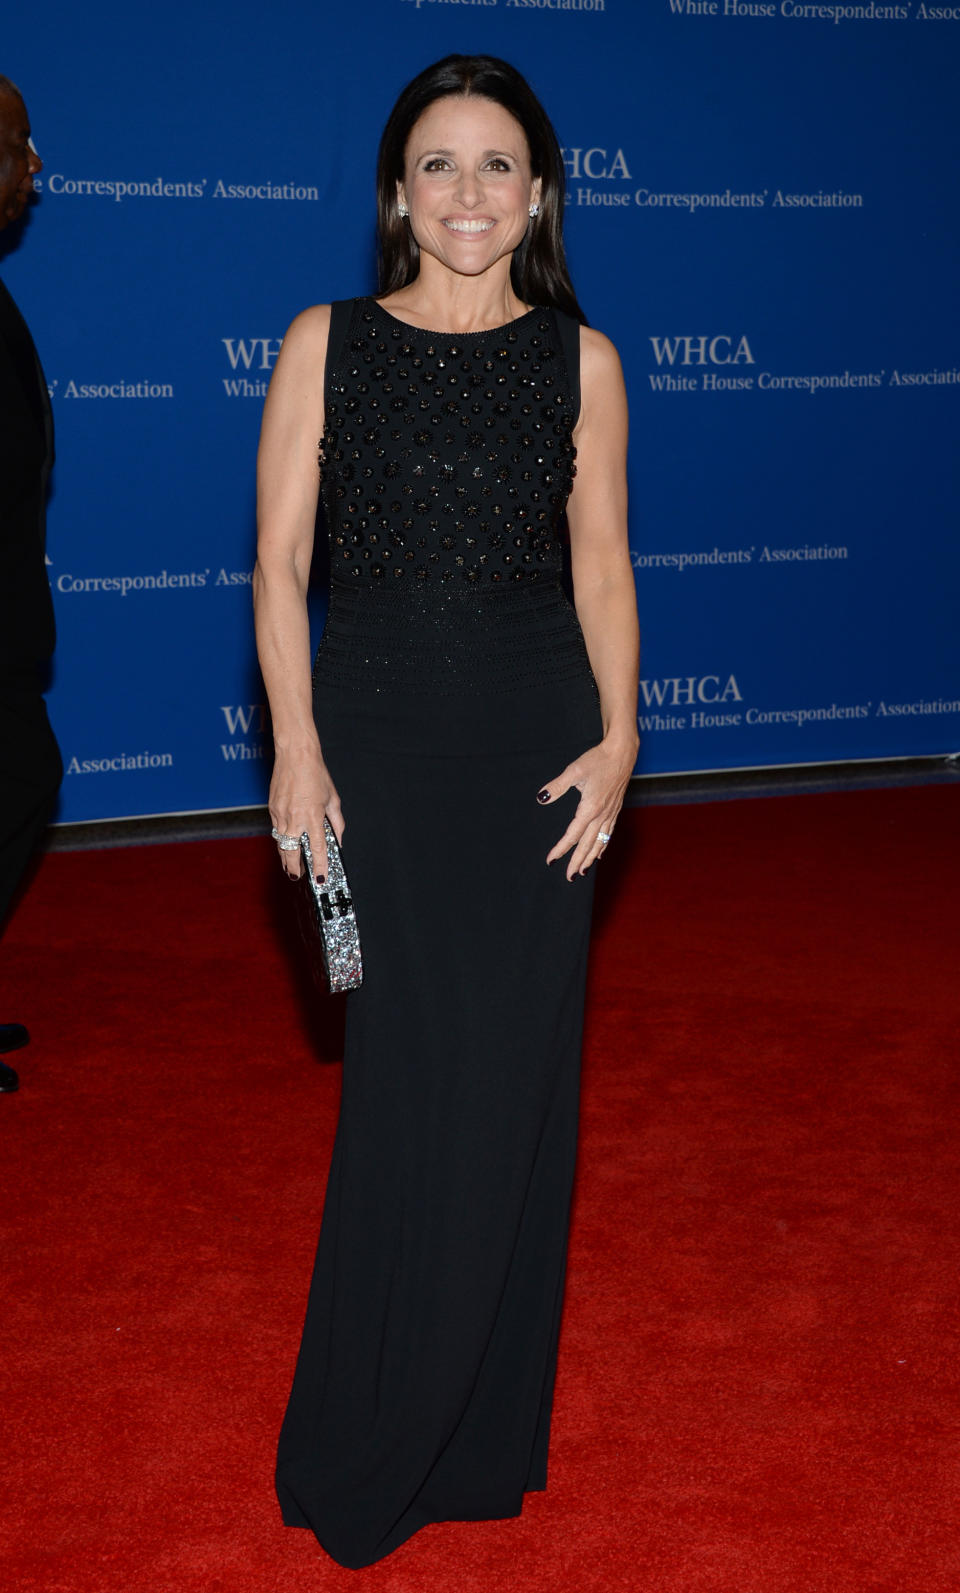 Julia Louis-Dreyfus arrives at the White House Correspondents' Association Dinner at the Washington Hilton Hotel, Saturday, May 3, 2014, in Washington. (Photo by Evan Agostini/Invision/AP)